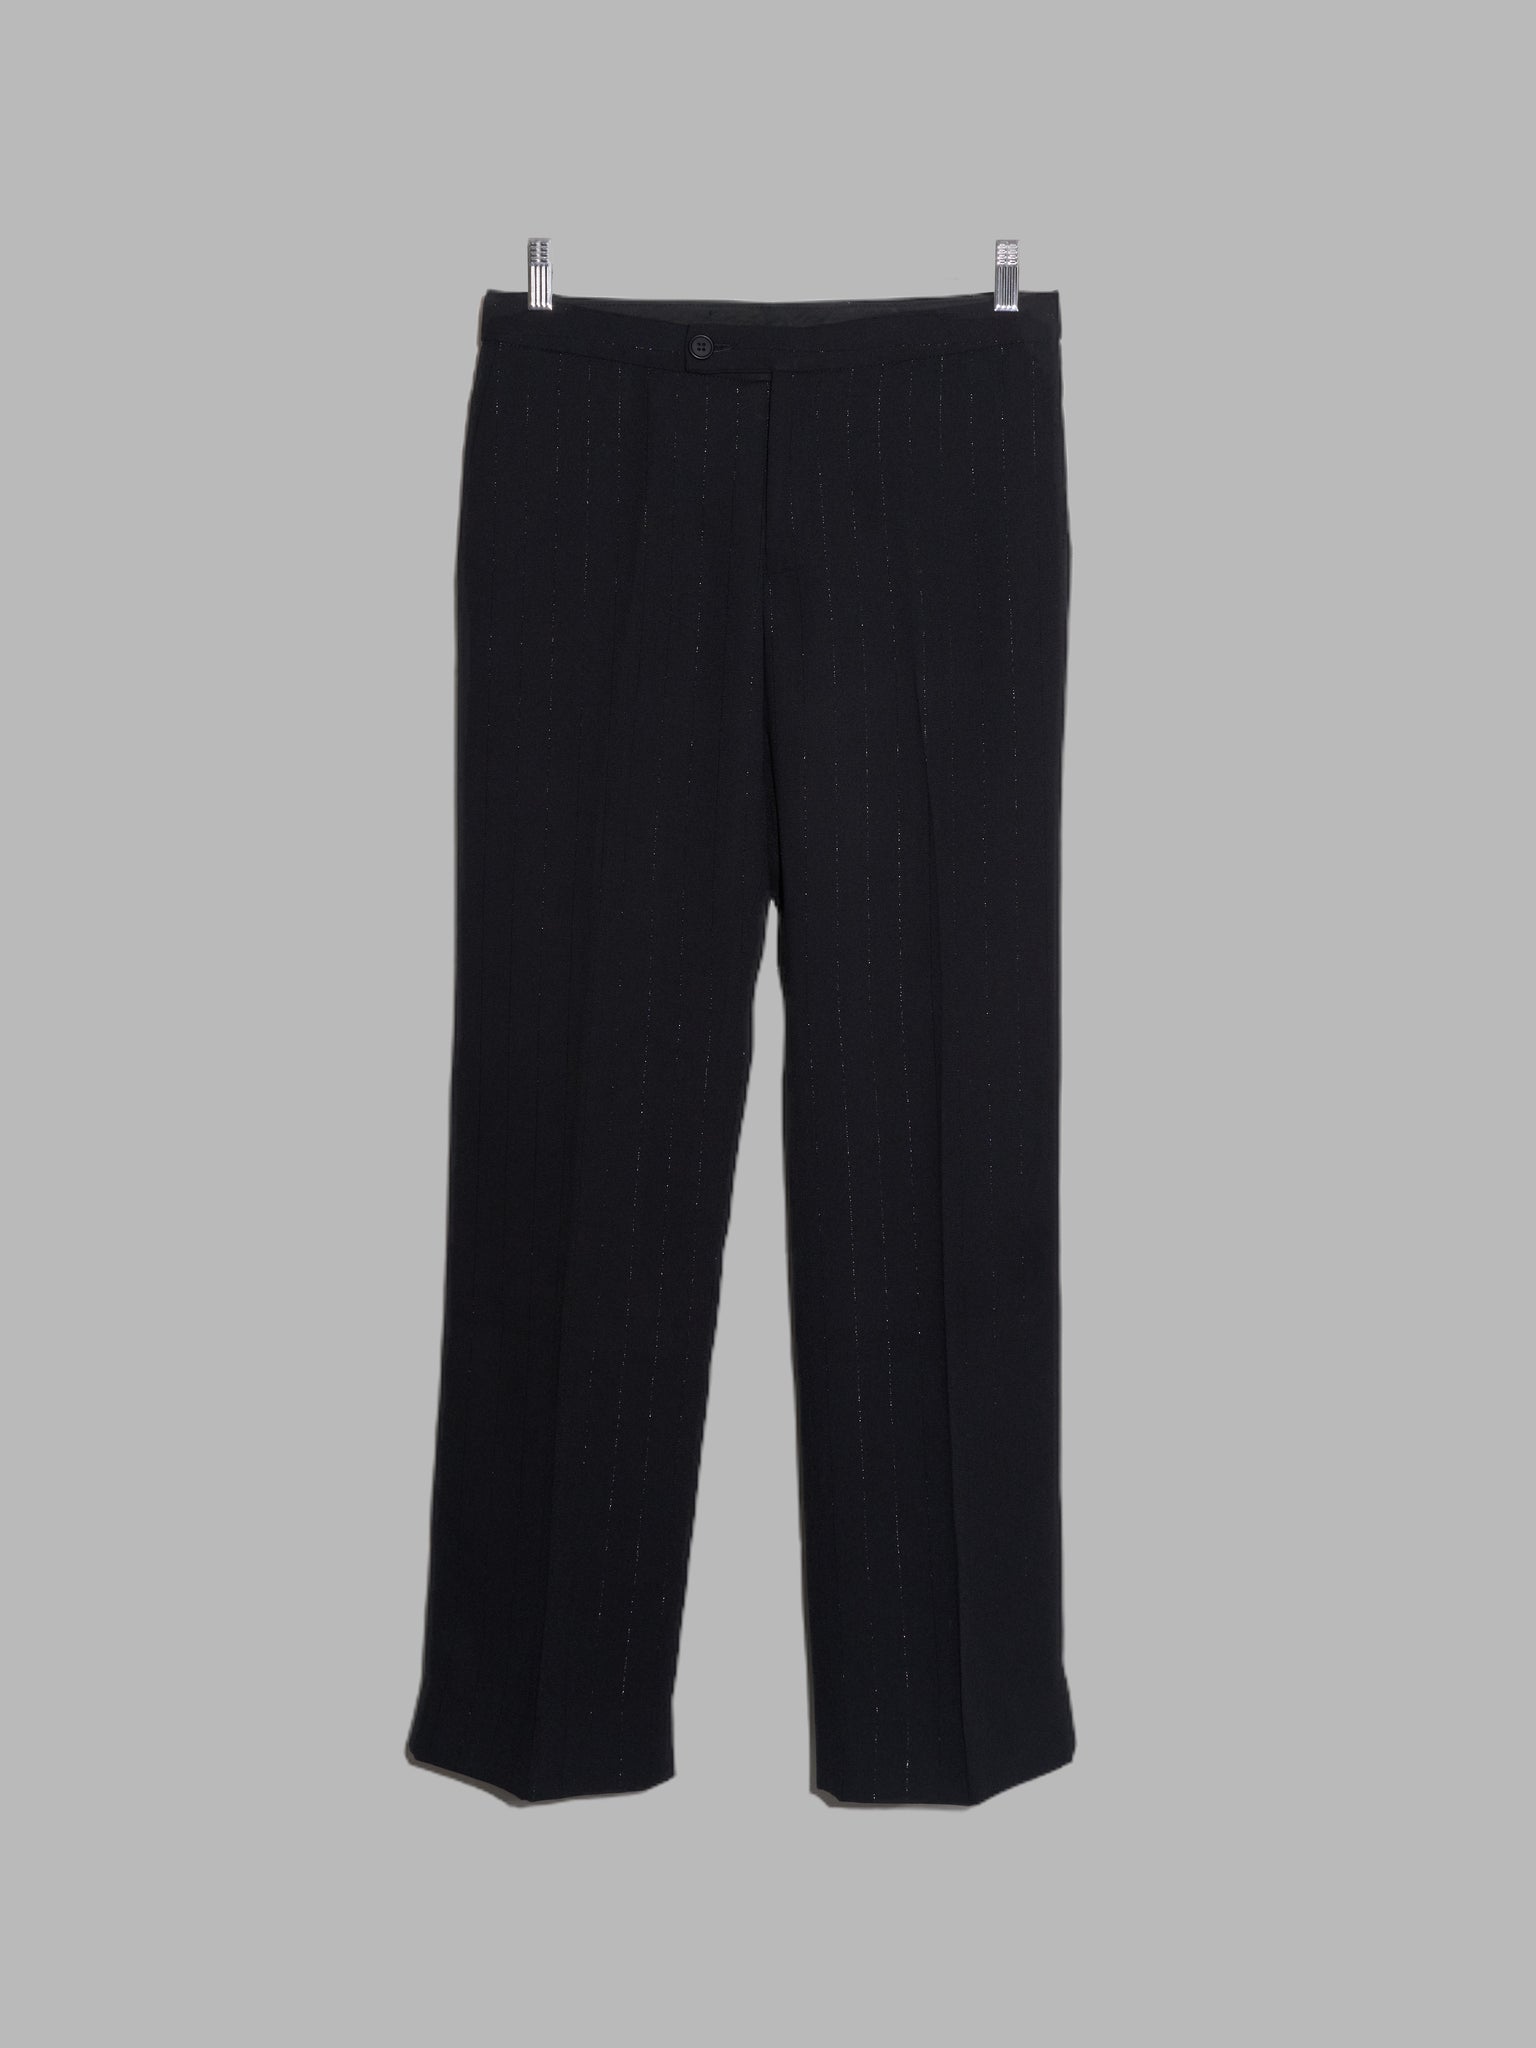 Jean Colonna black polyester trousers with lamé stripe - size 40